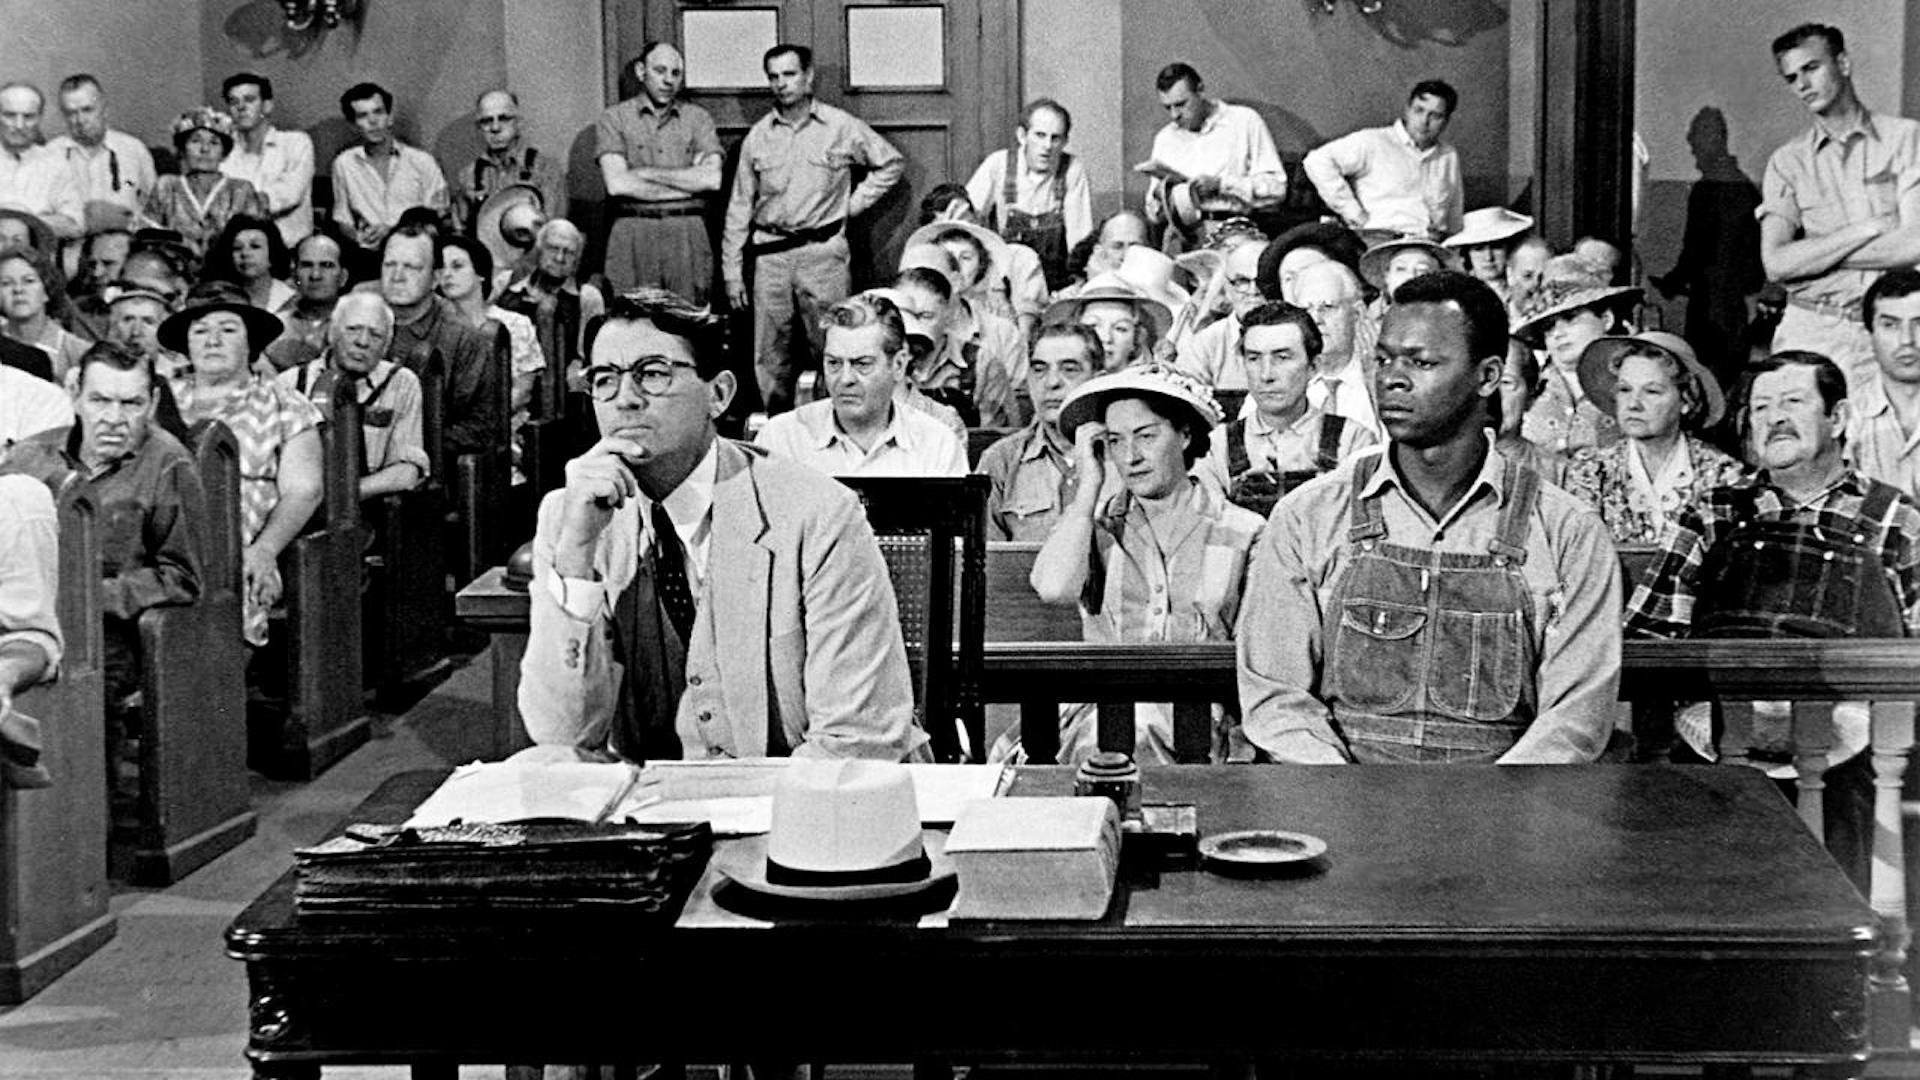 Atticus Finch (Gregory Peck) sitting with Tom (Brock Peters) in a courthouse in 'To Kill a Mockingbird' (1962)